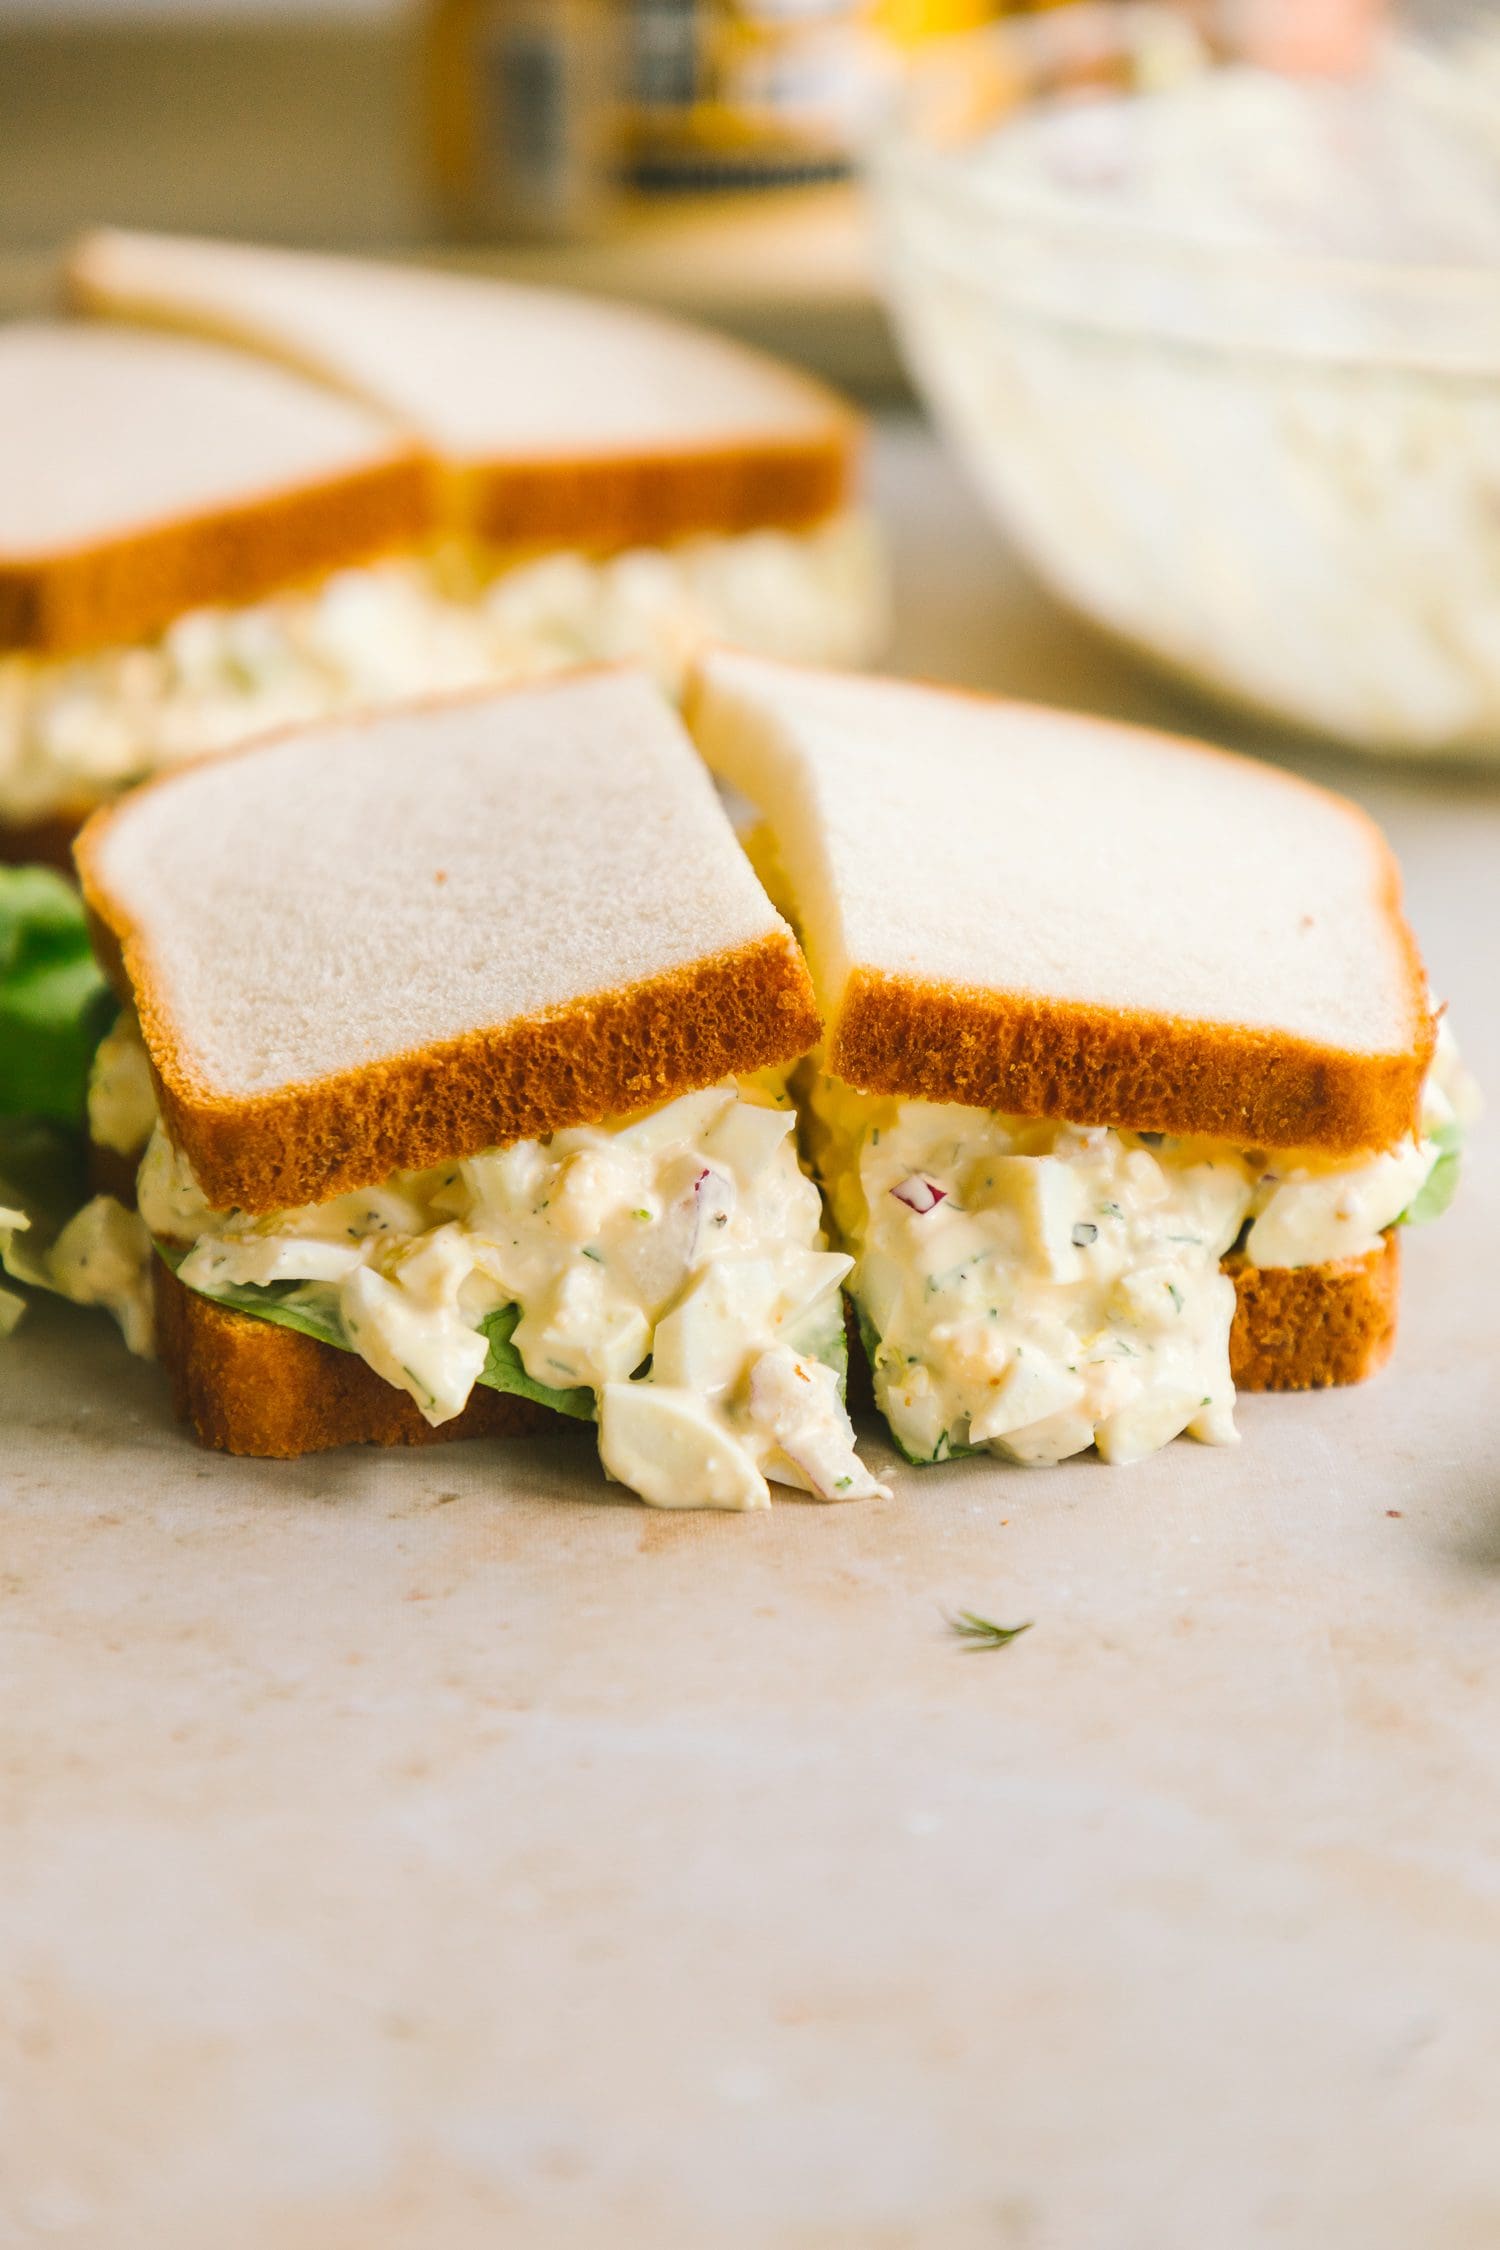 Egg Salad (The Perfect Recipe for Sandwiches) - Simple Joy